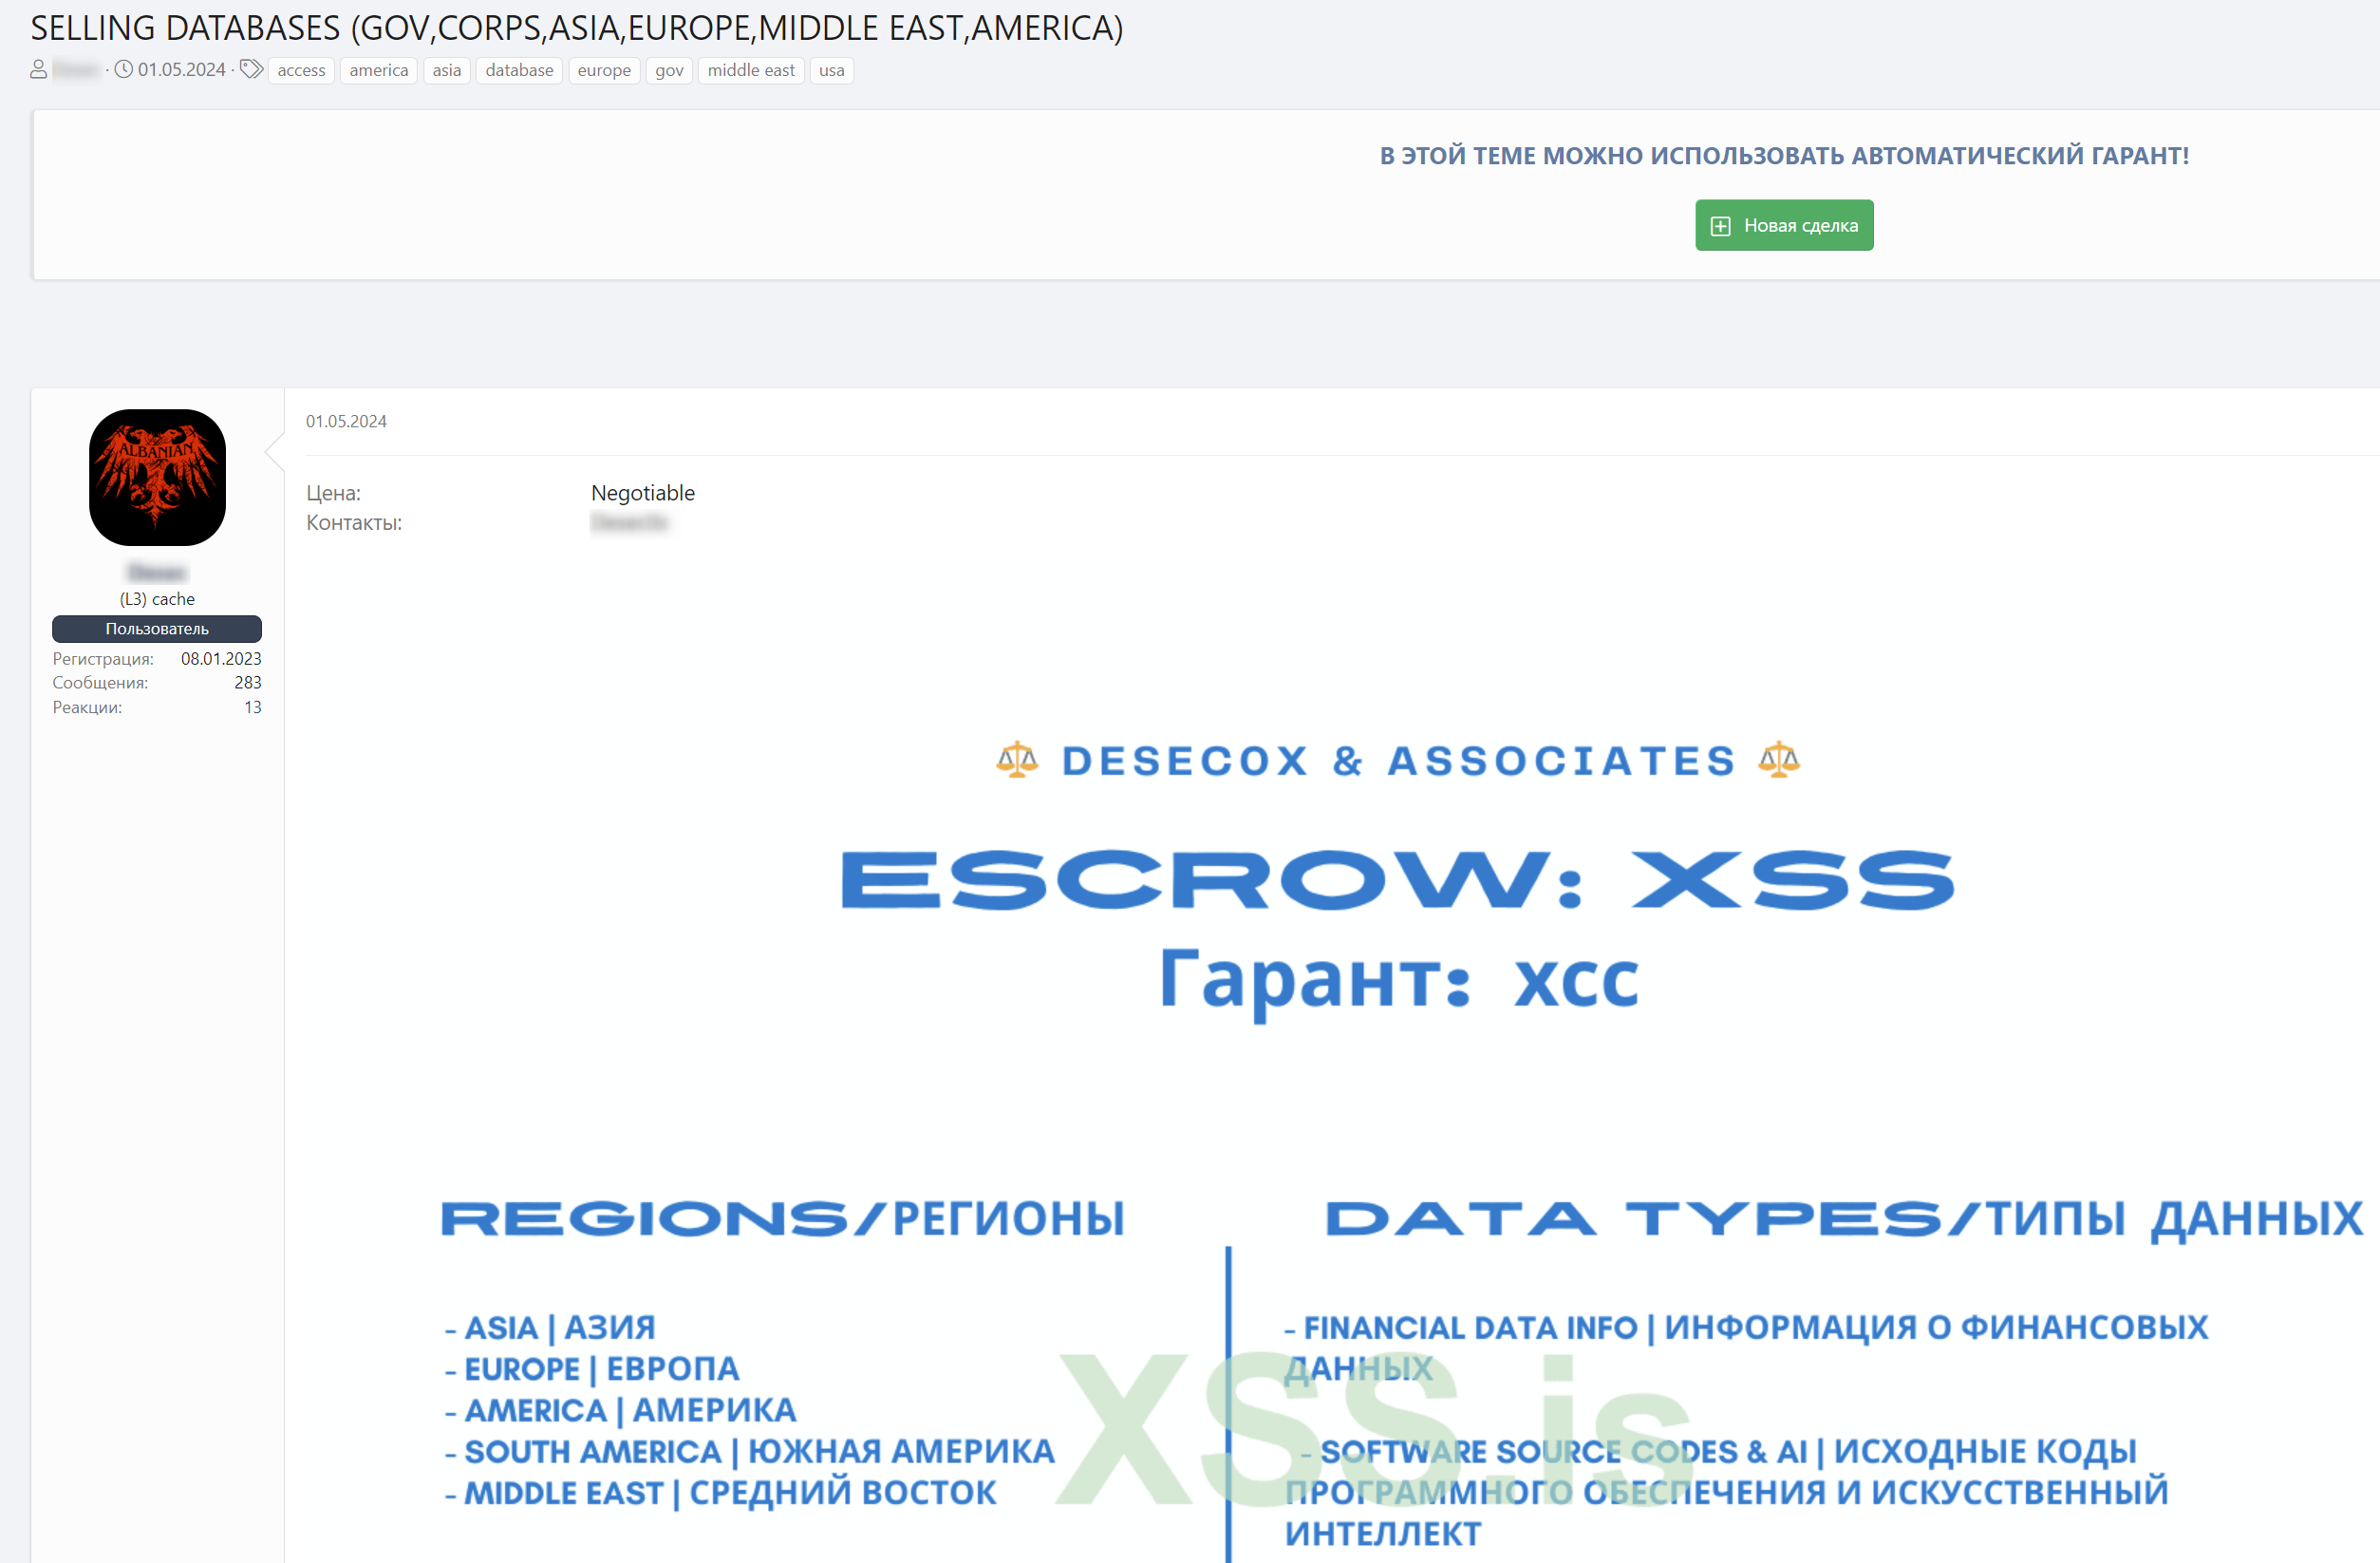 Screenshot that shows a  known threat actor on XSS selling global, cross-sector databases.